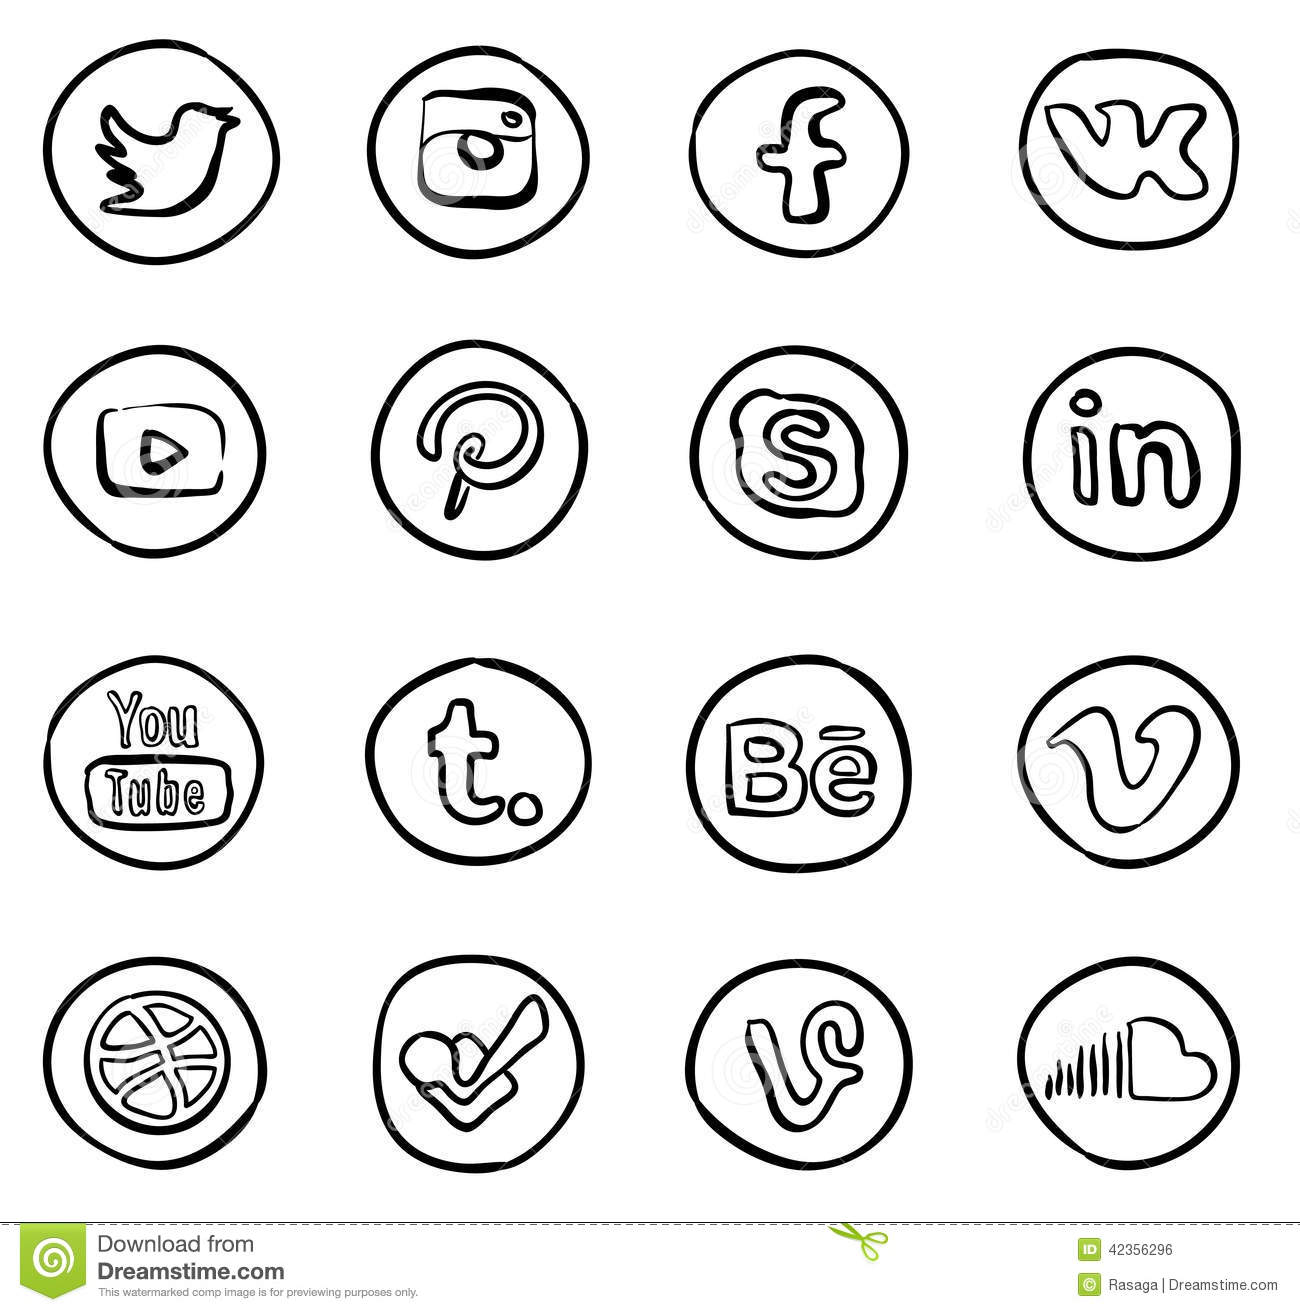 11 Hand Drawn Icon Technology Images Hand Drawn Web Icons Hand Drawn